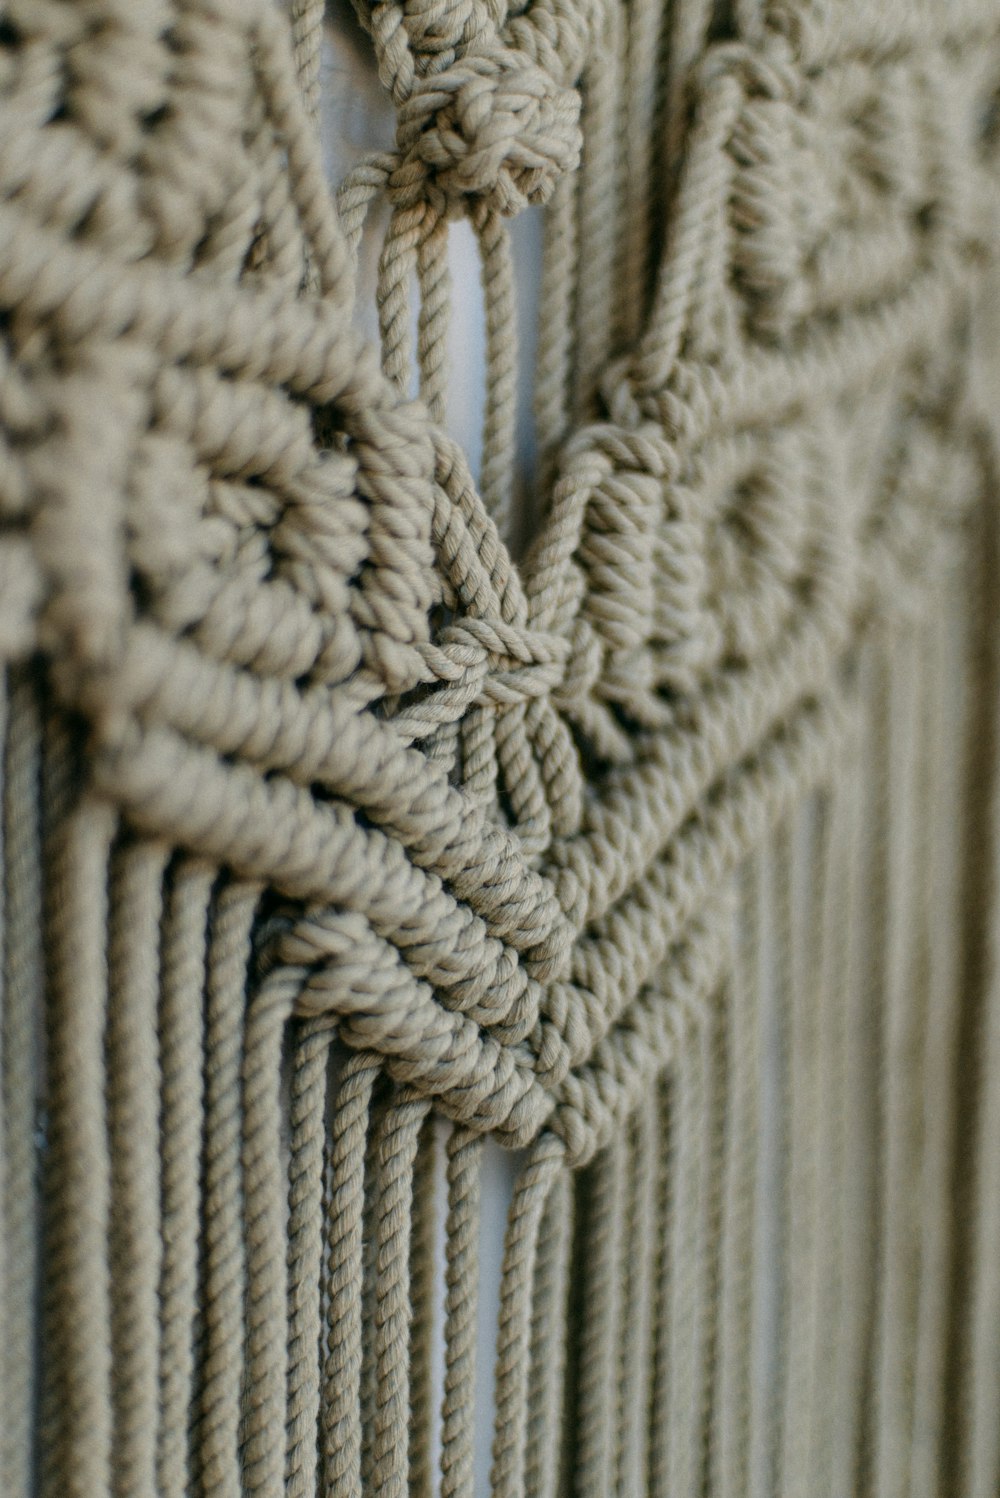 a close up of a wall hanging made of rope